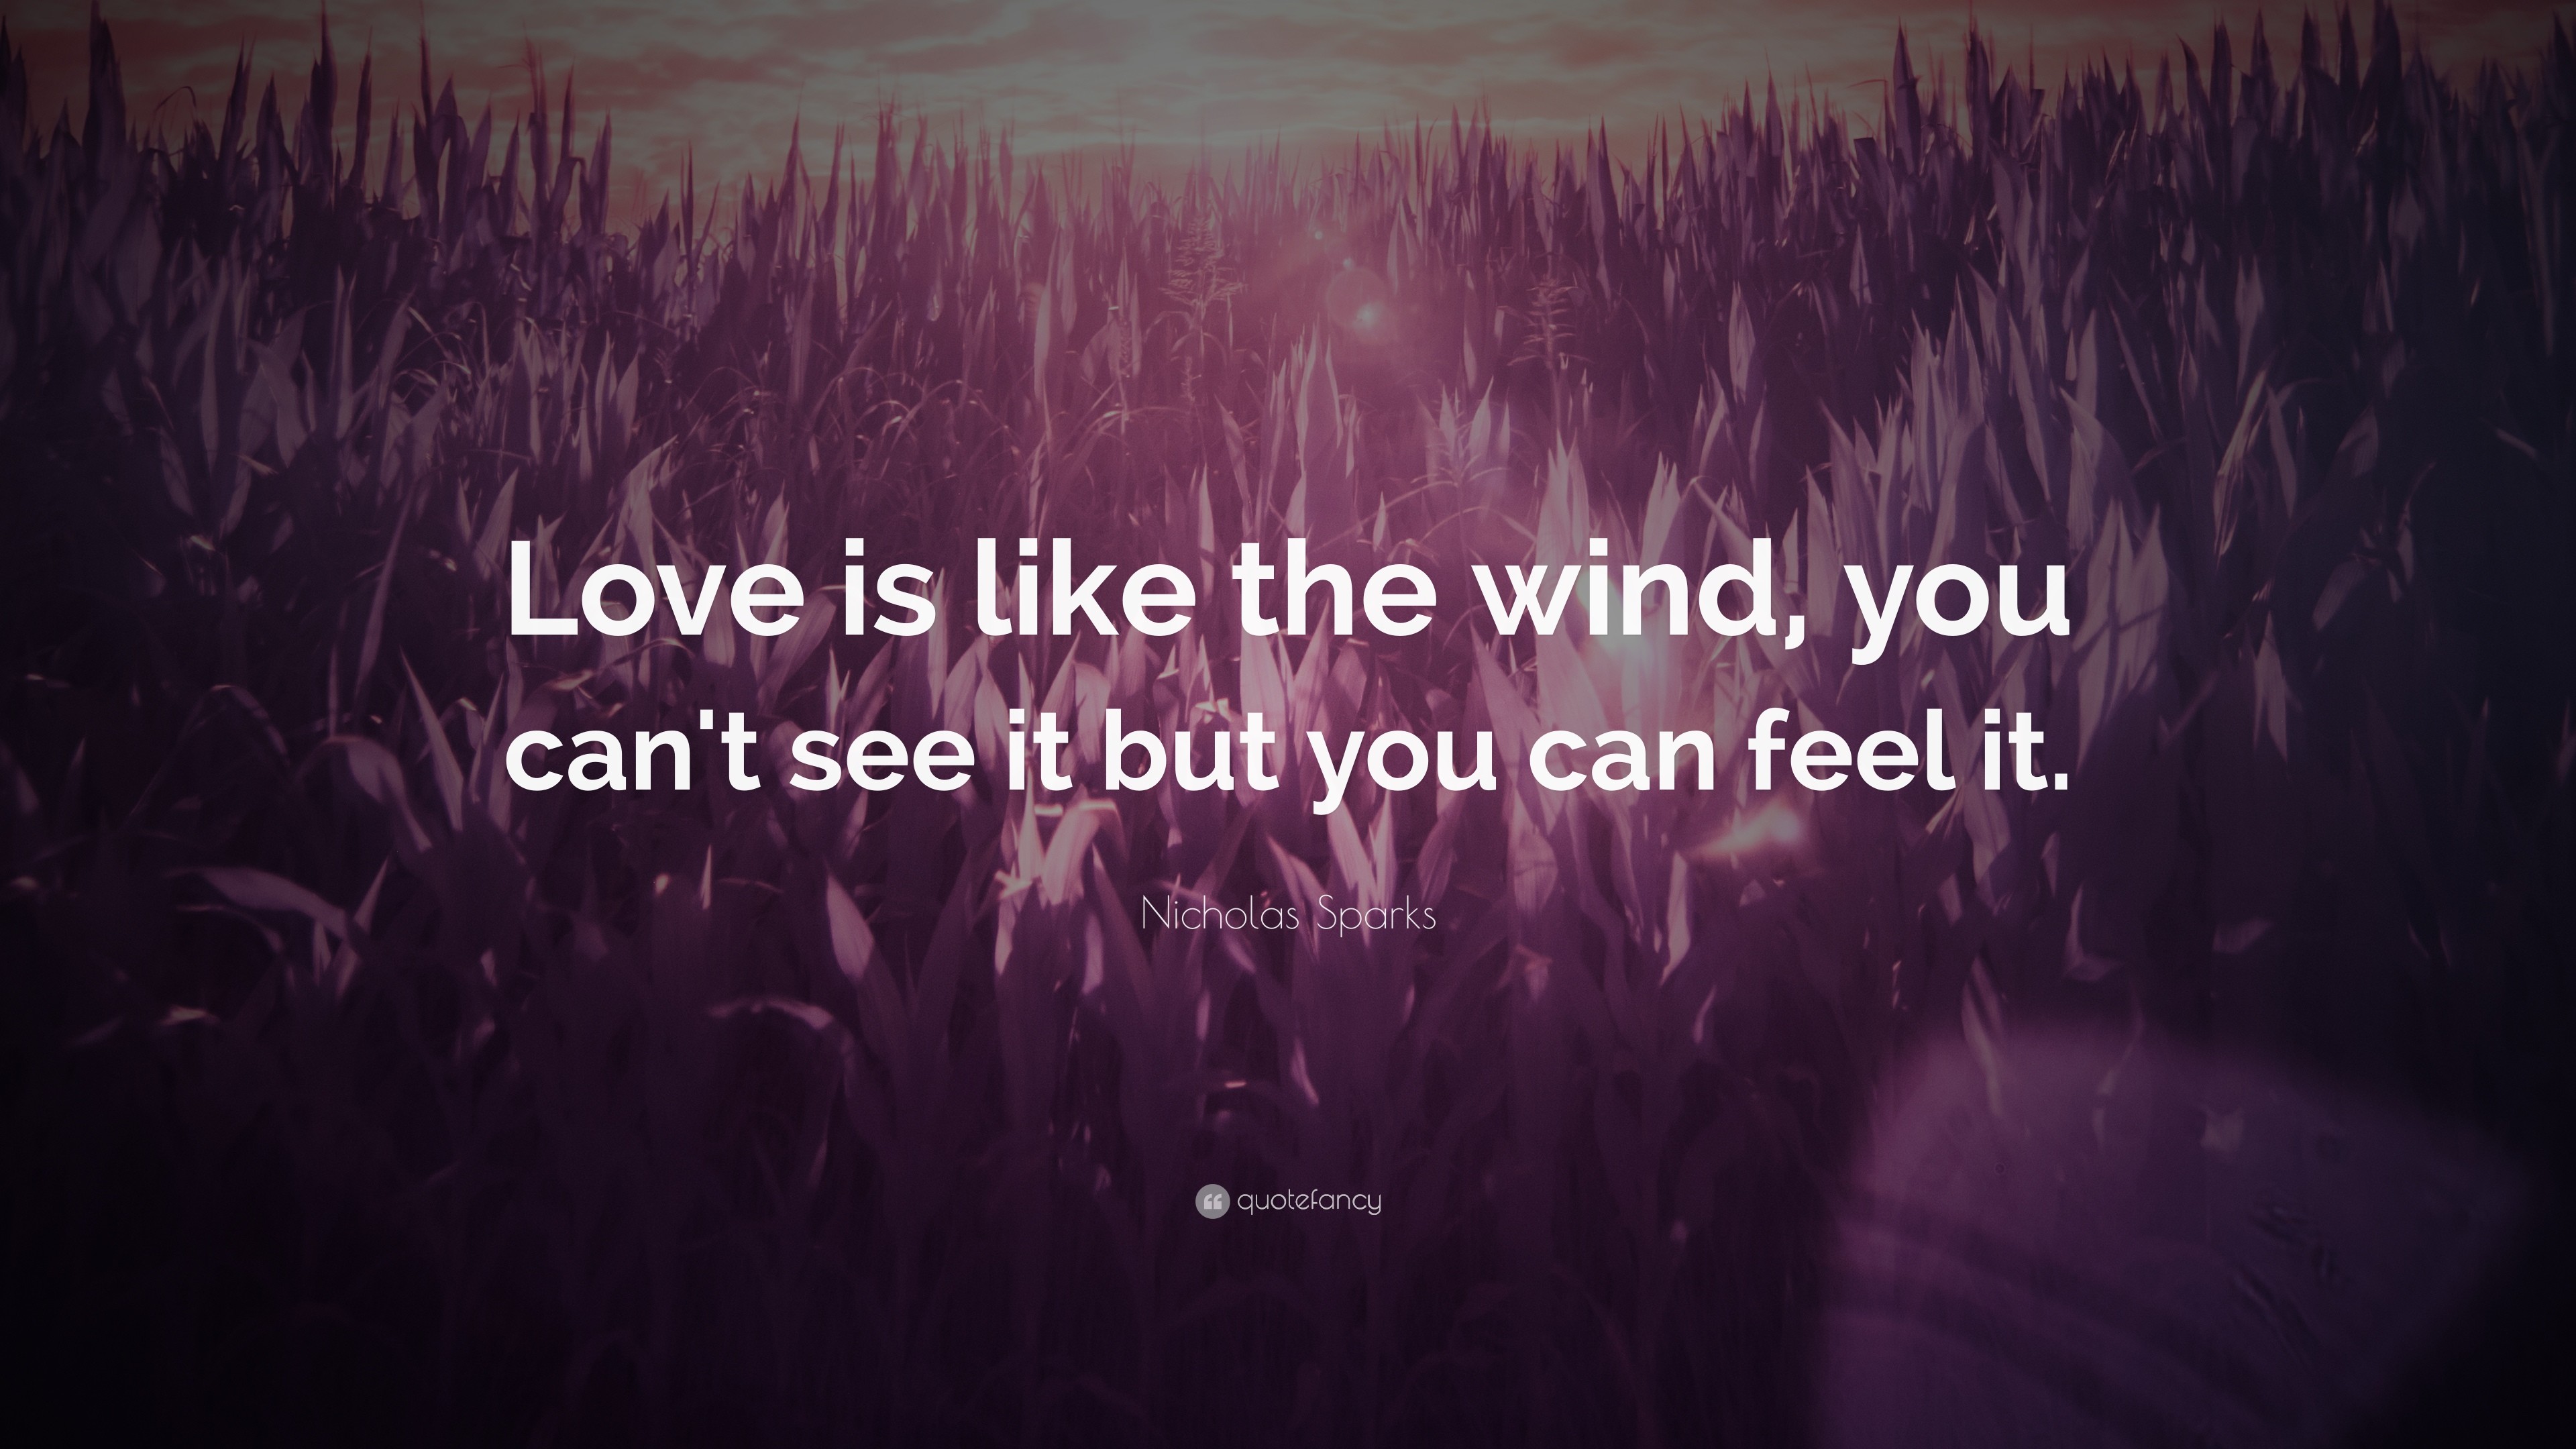 3840x2160 Love Quotes: “Love is like the wind, you can't see it